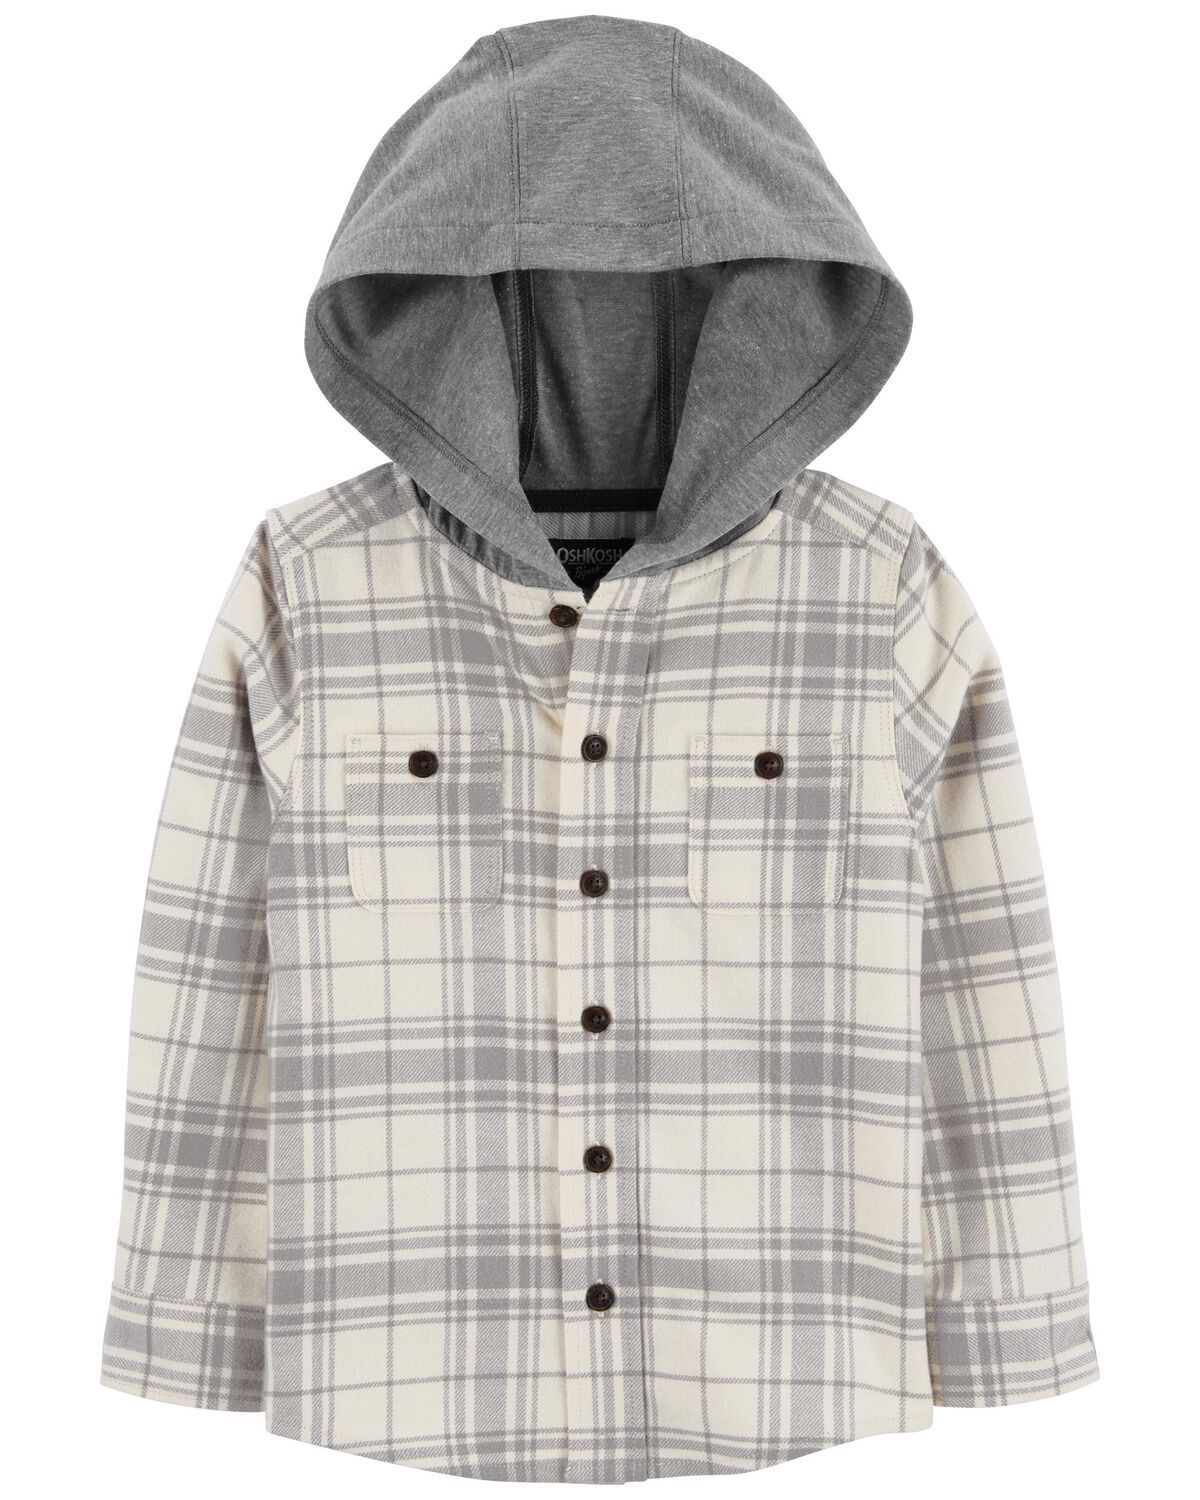 Plaid Baby Cozy Flannel Hooded Top | carters.com | Carter's